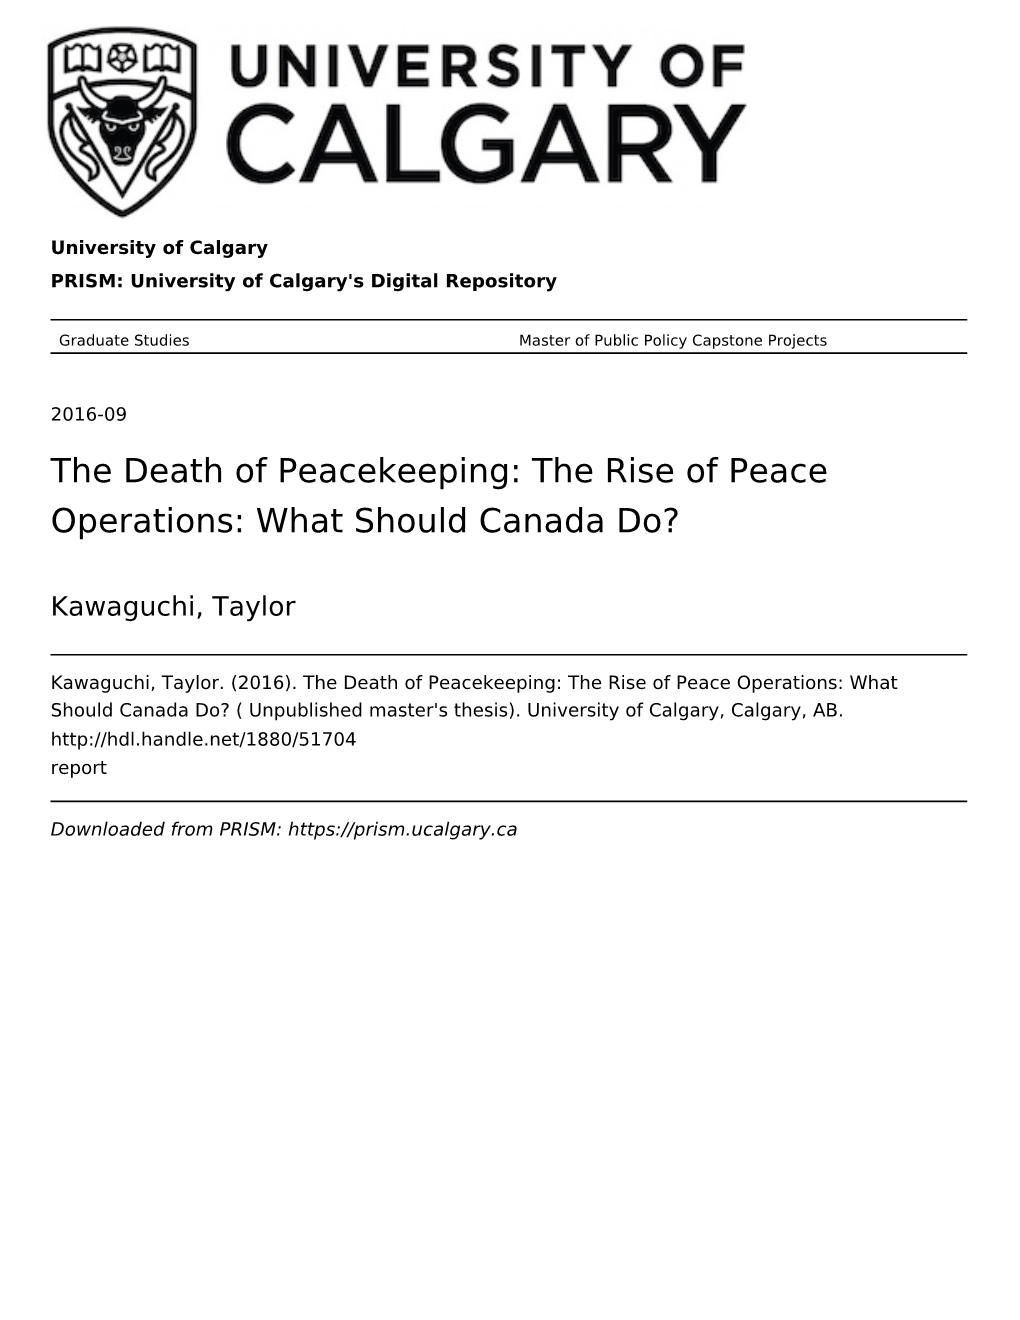 The Death of Peacekeeping: the Rise of Peace Operations: What Should Canada Do?